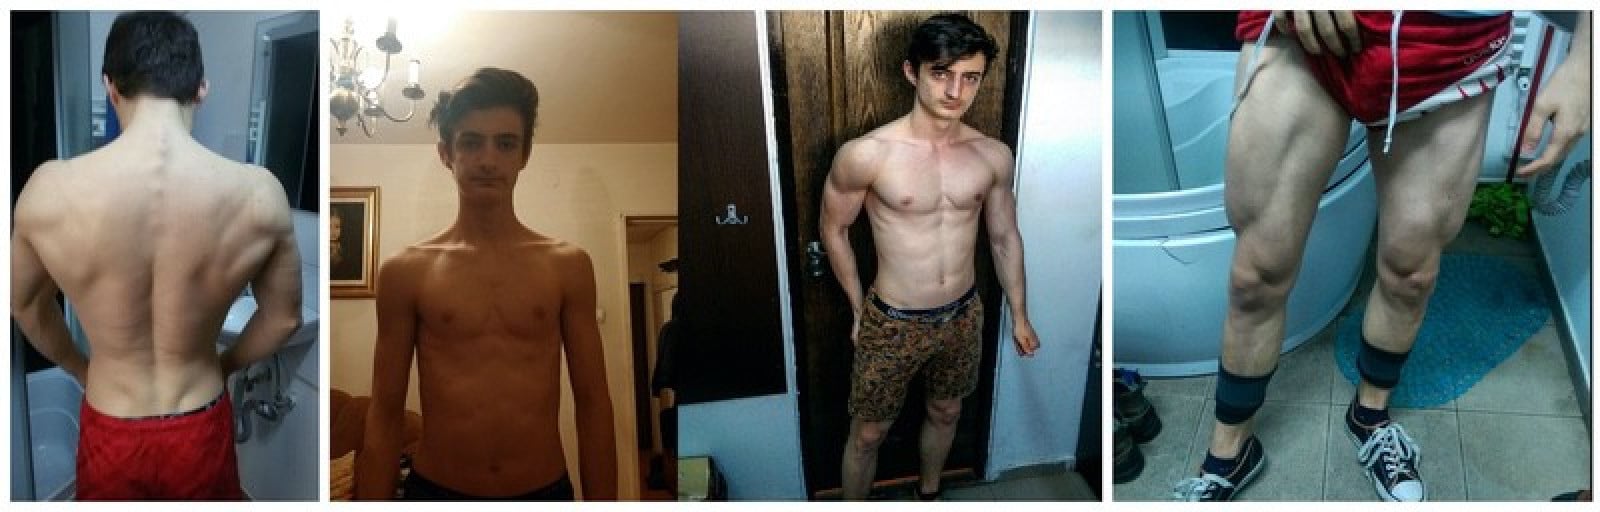 5 feet 11 Male Before and After 28 lbs Weight Gain 115 lbs to 143 lbs